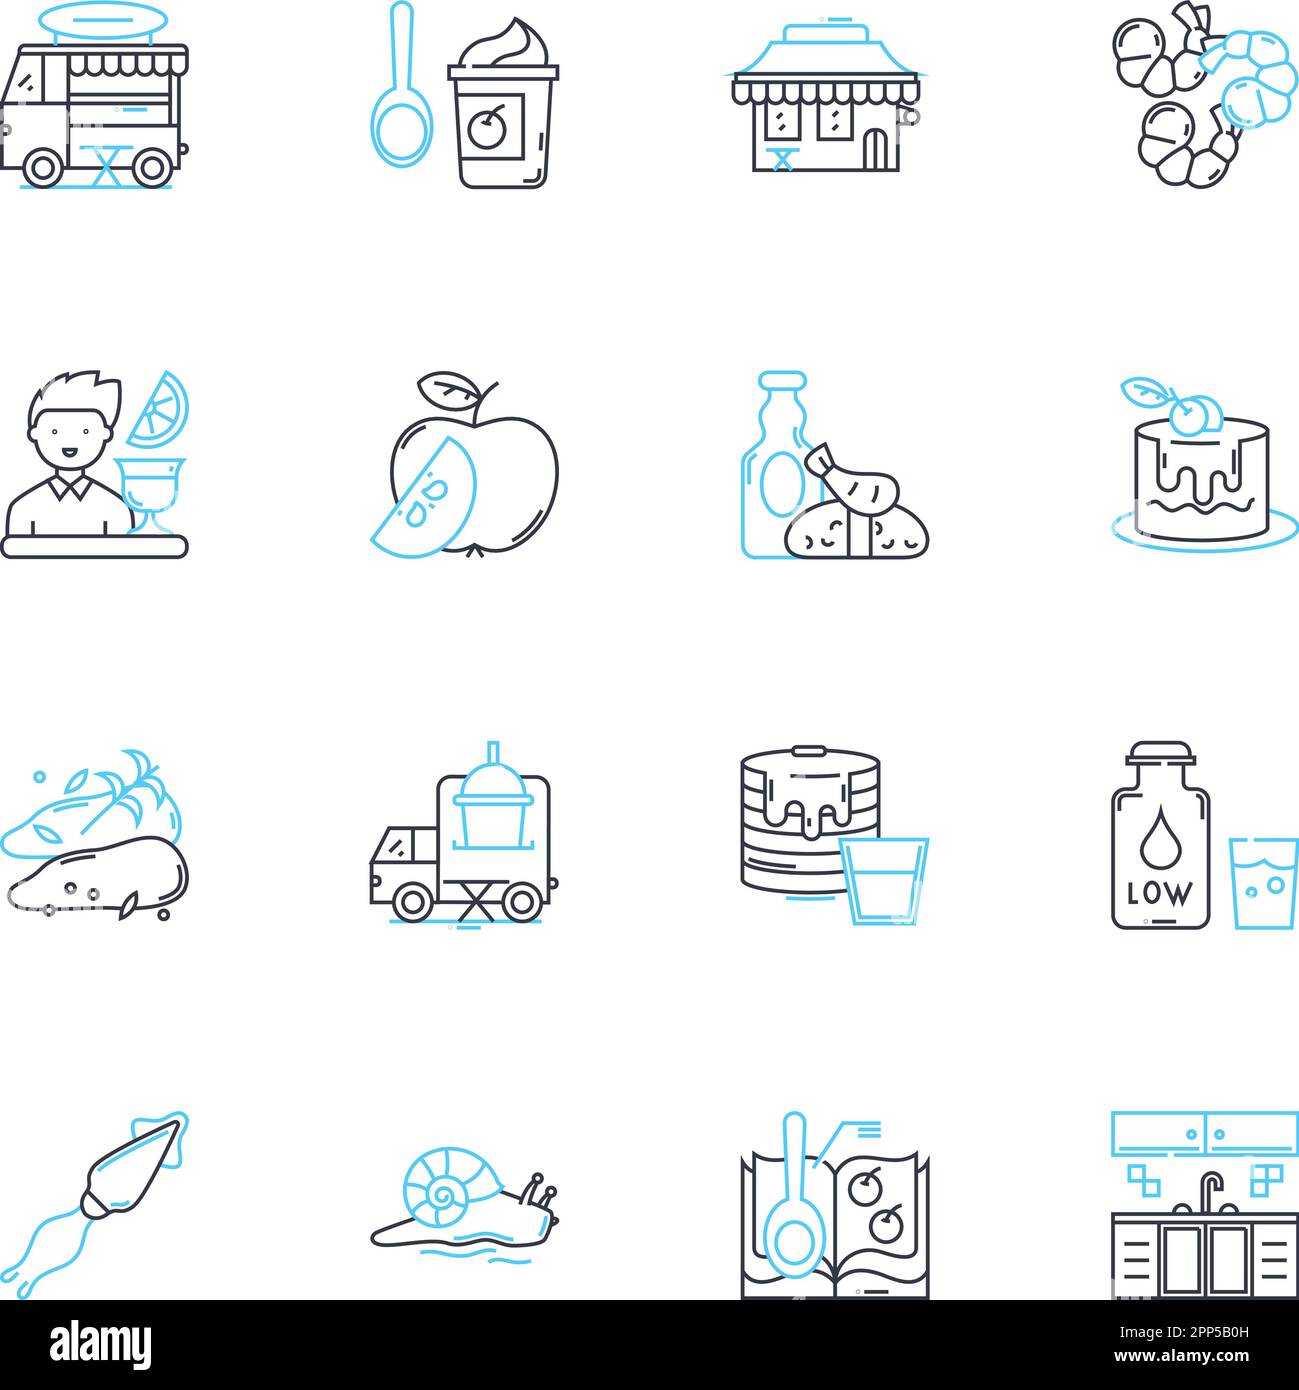 Edible goods trade linear icons set. Market, Supply, Demand, Production, Distribution, Agriculture, Food line vector and concept signs. Consumer,Trade Stock Vector